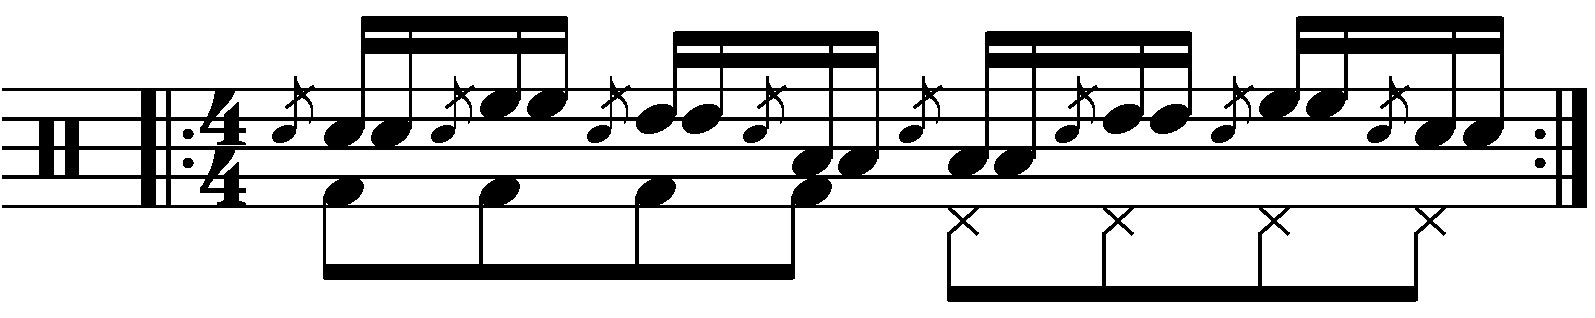 Flam tap with moving standard notes